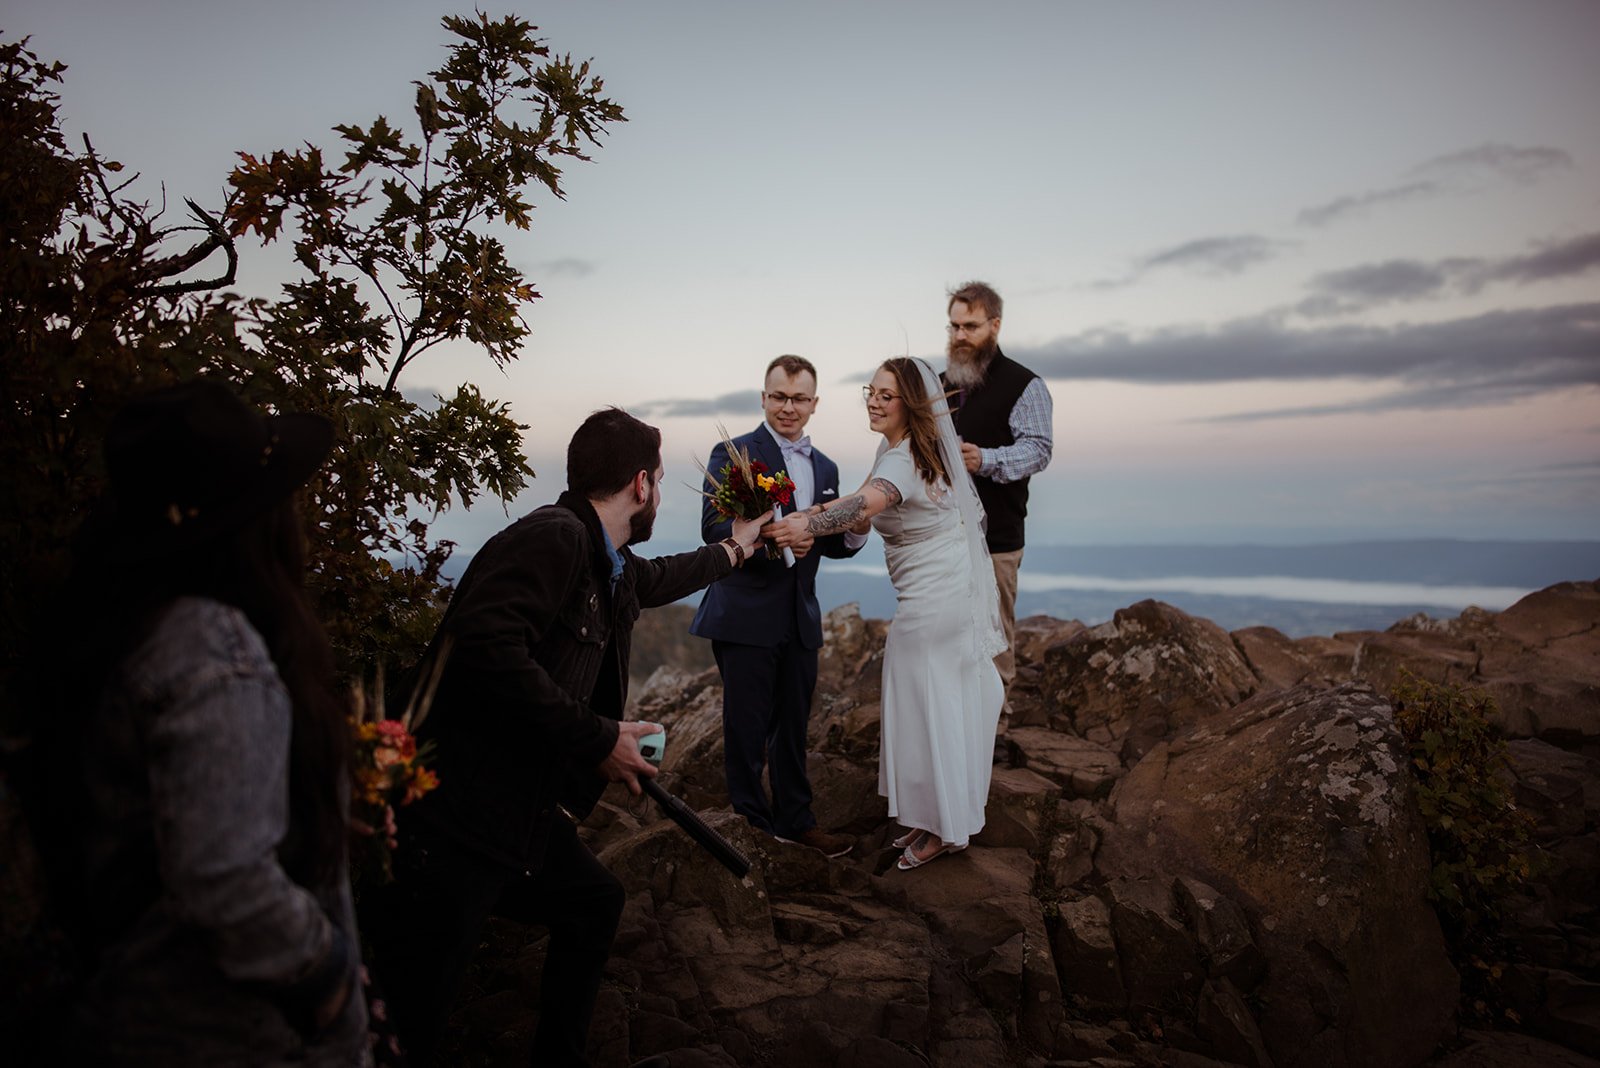 Shenandoah National Park Hiking Elopement with Guests - White Sails Creative_7.jpg